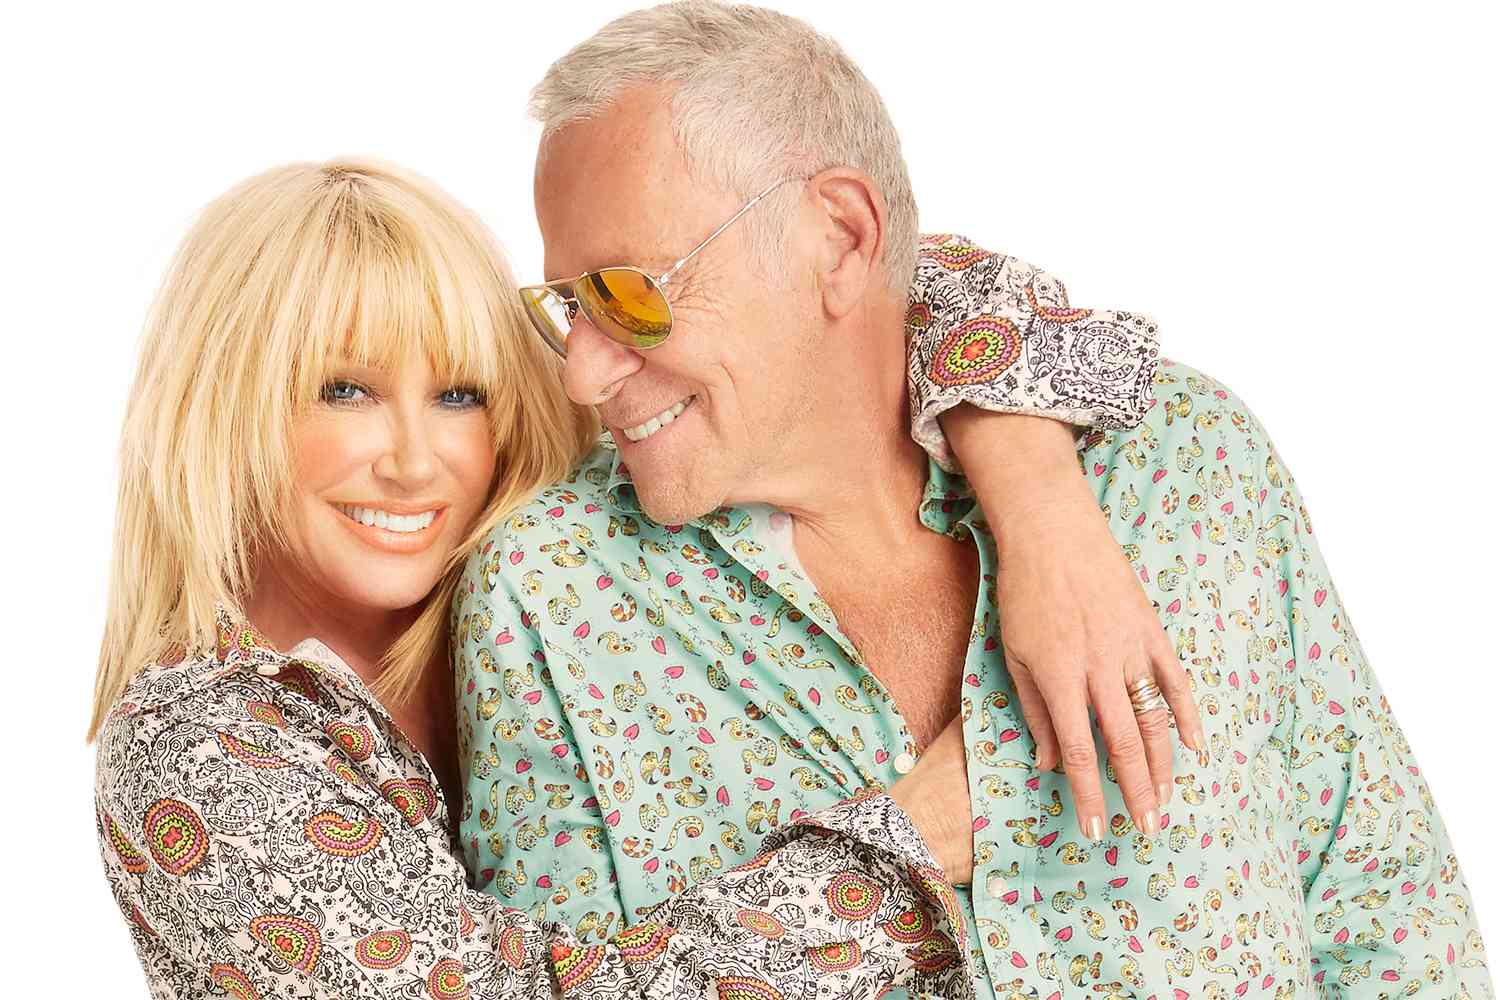 Alan Hamel Remembers Suzanne Somers 7 Months After Her Death (Exclusive) [Video]